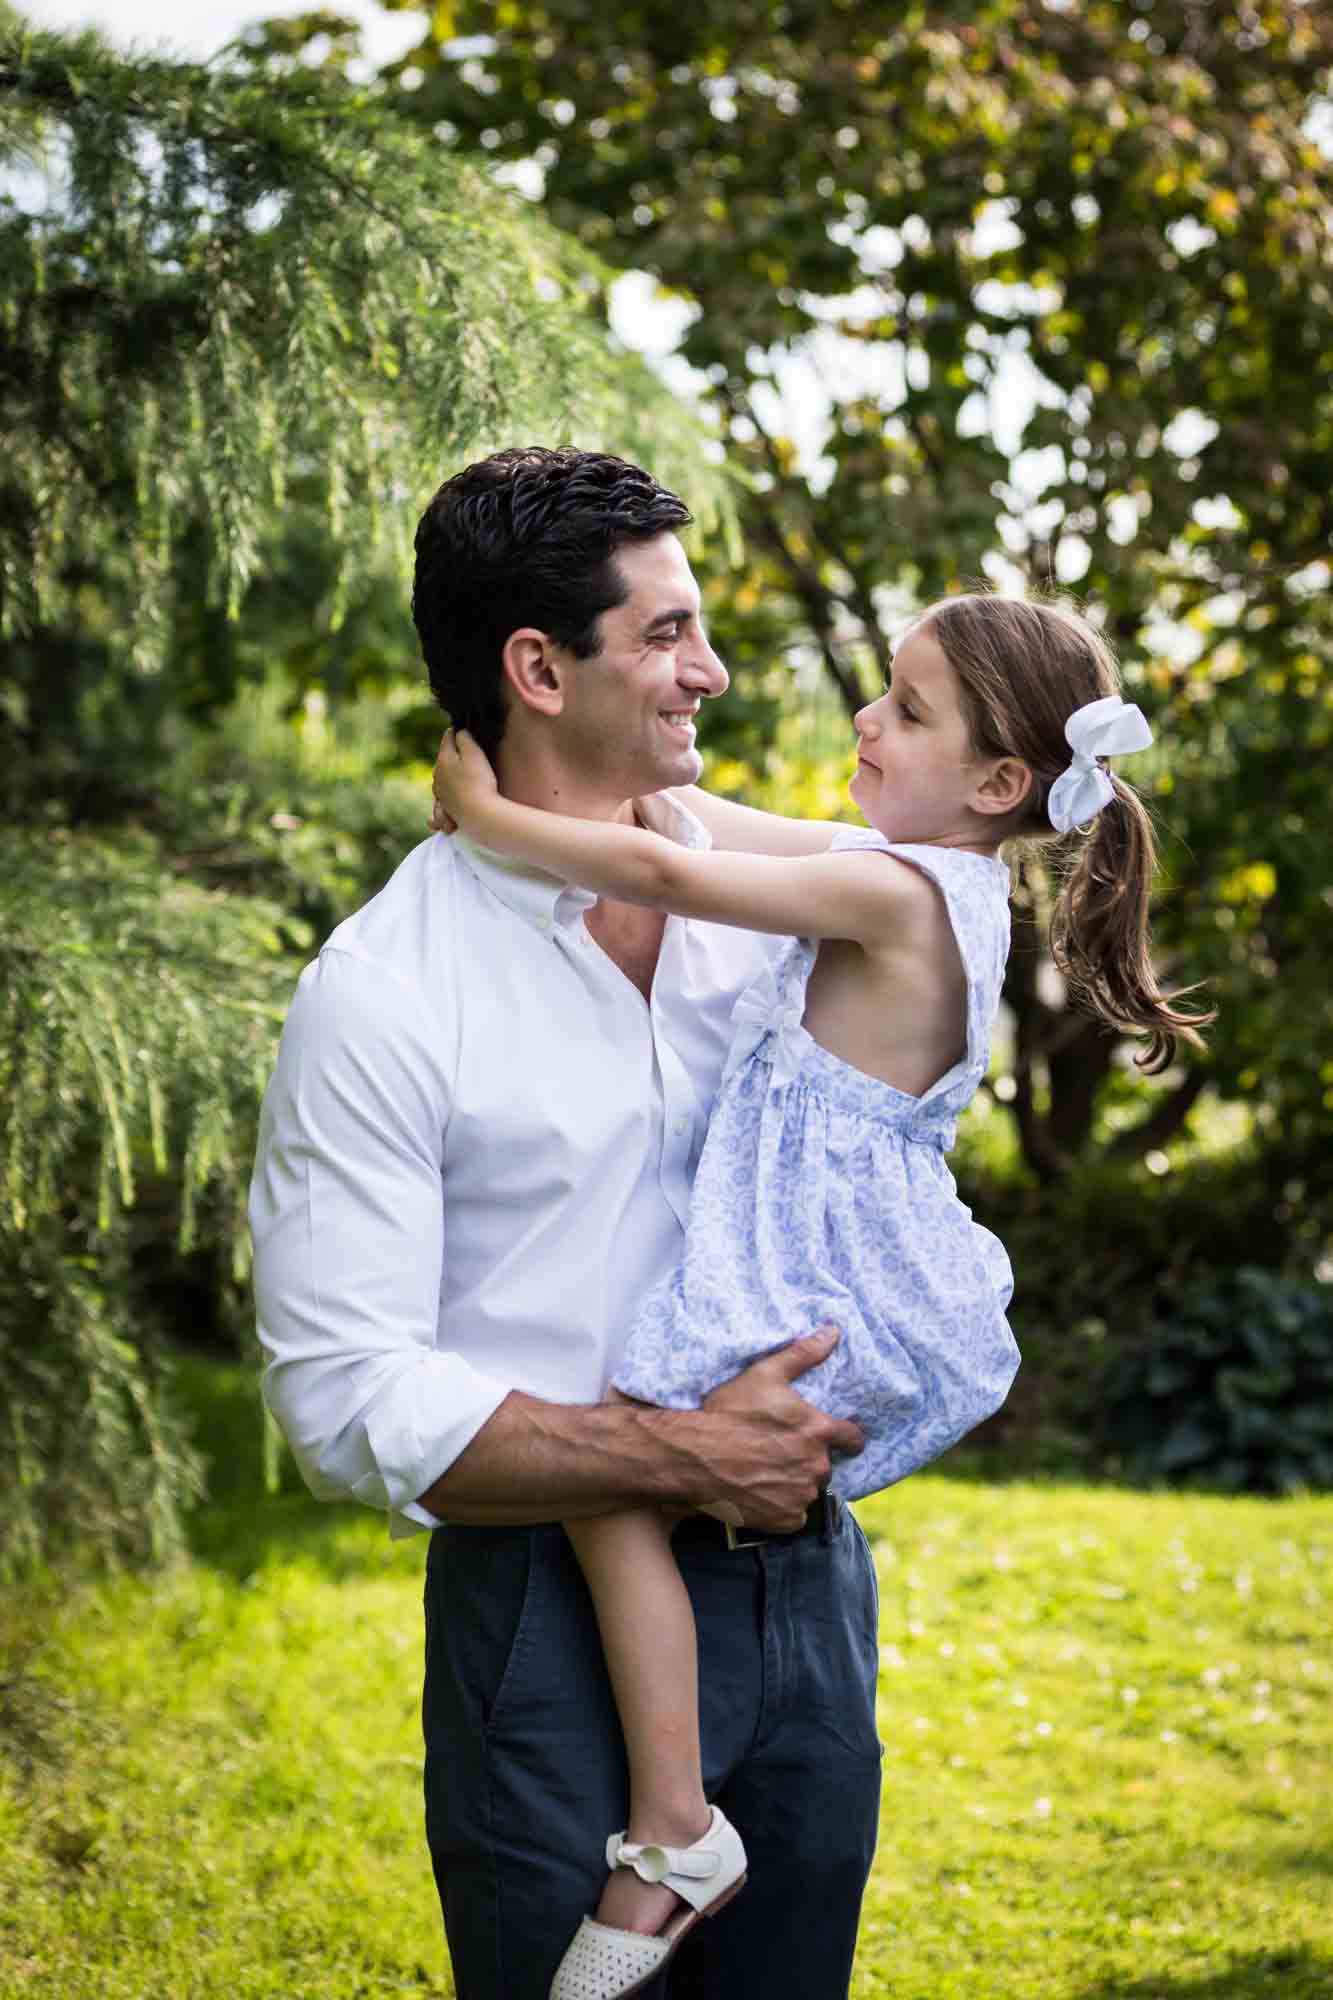 Man wearing white shirt holding little girl in front of trees during a Narrows Botanical Gardens family portrait session